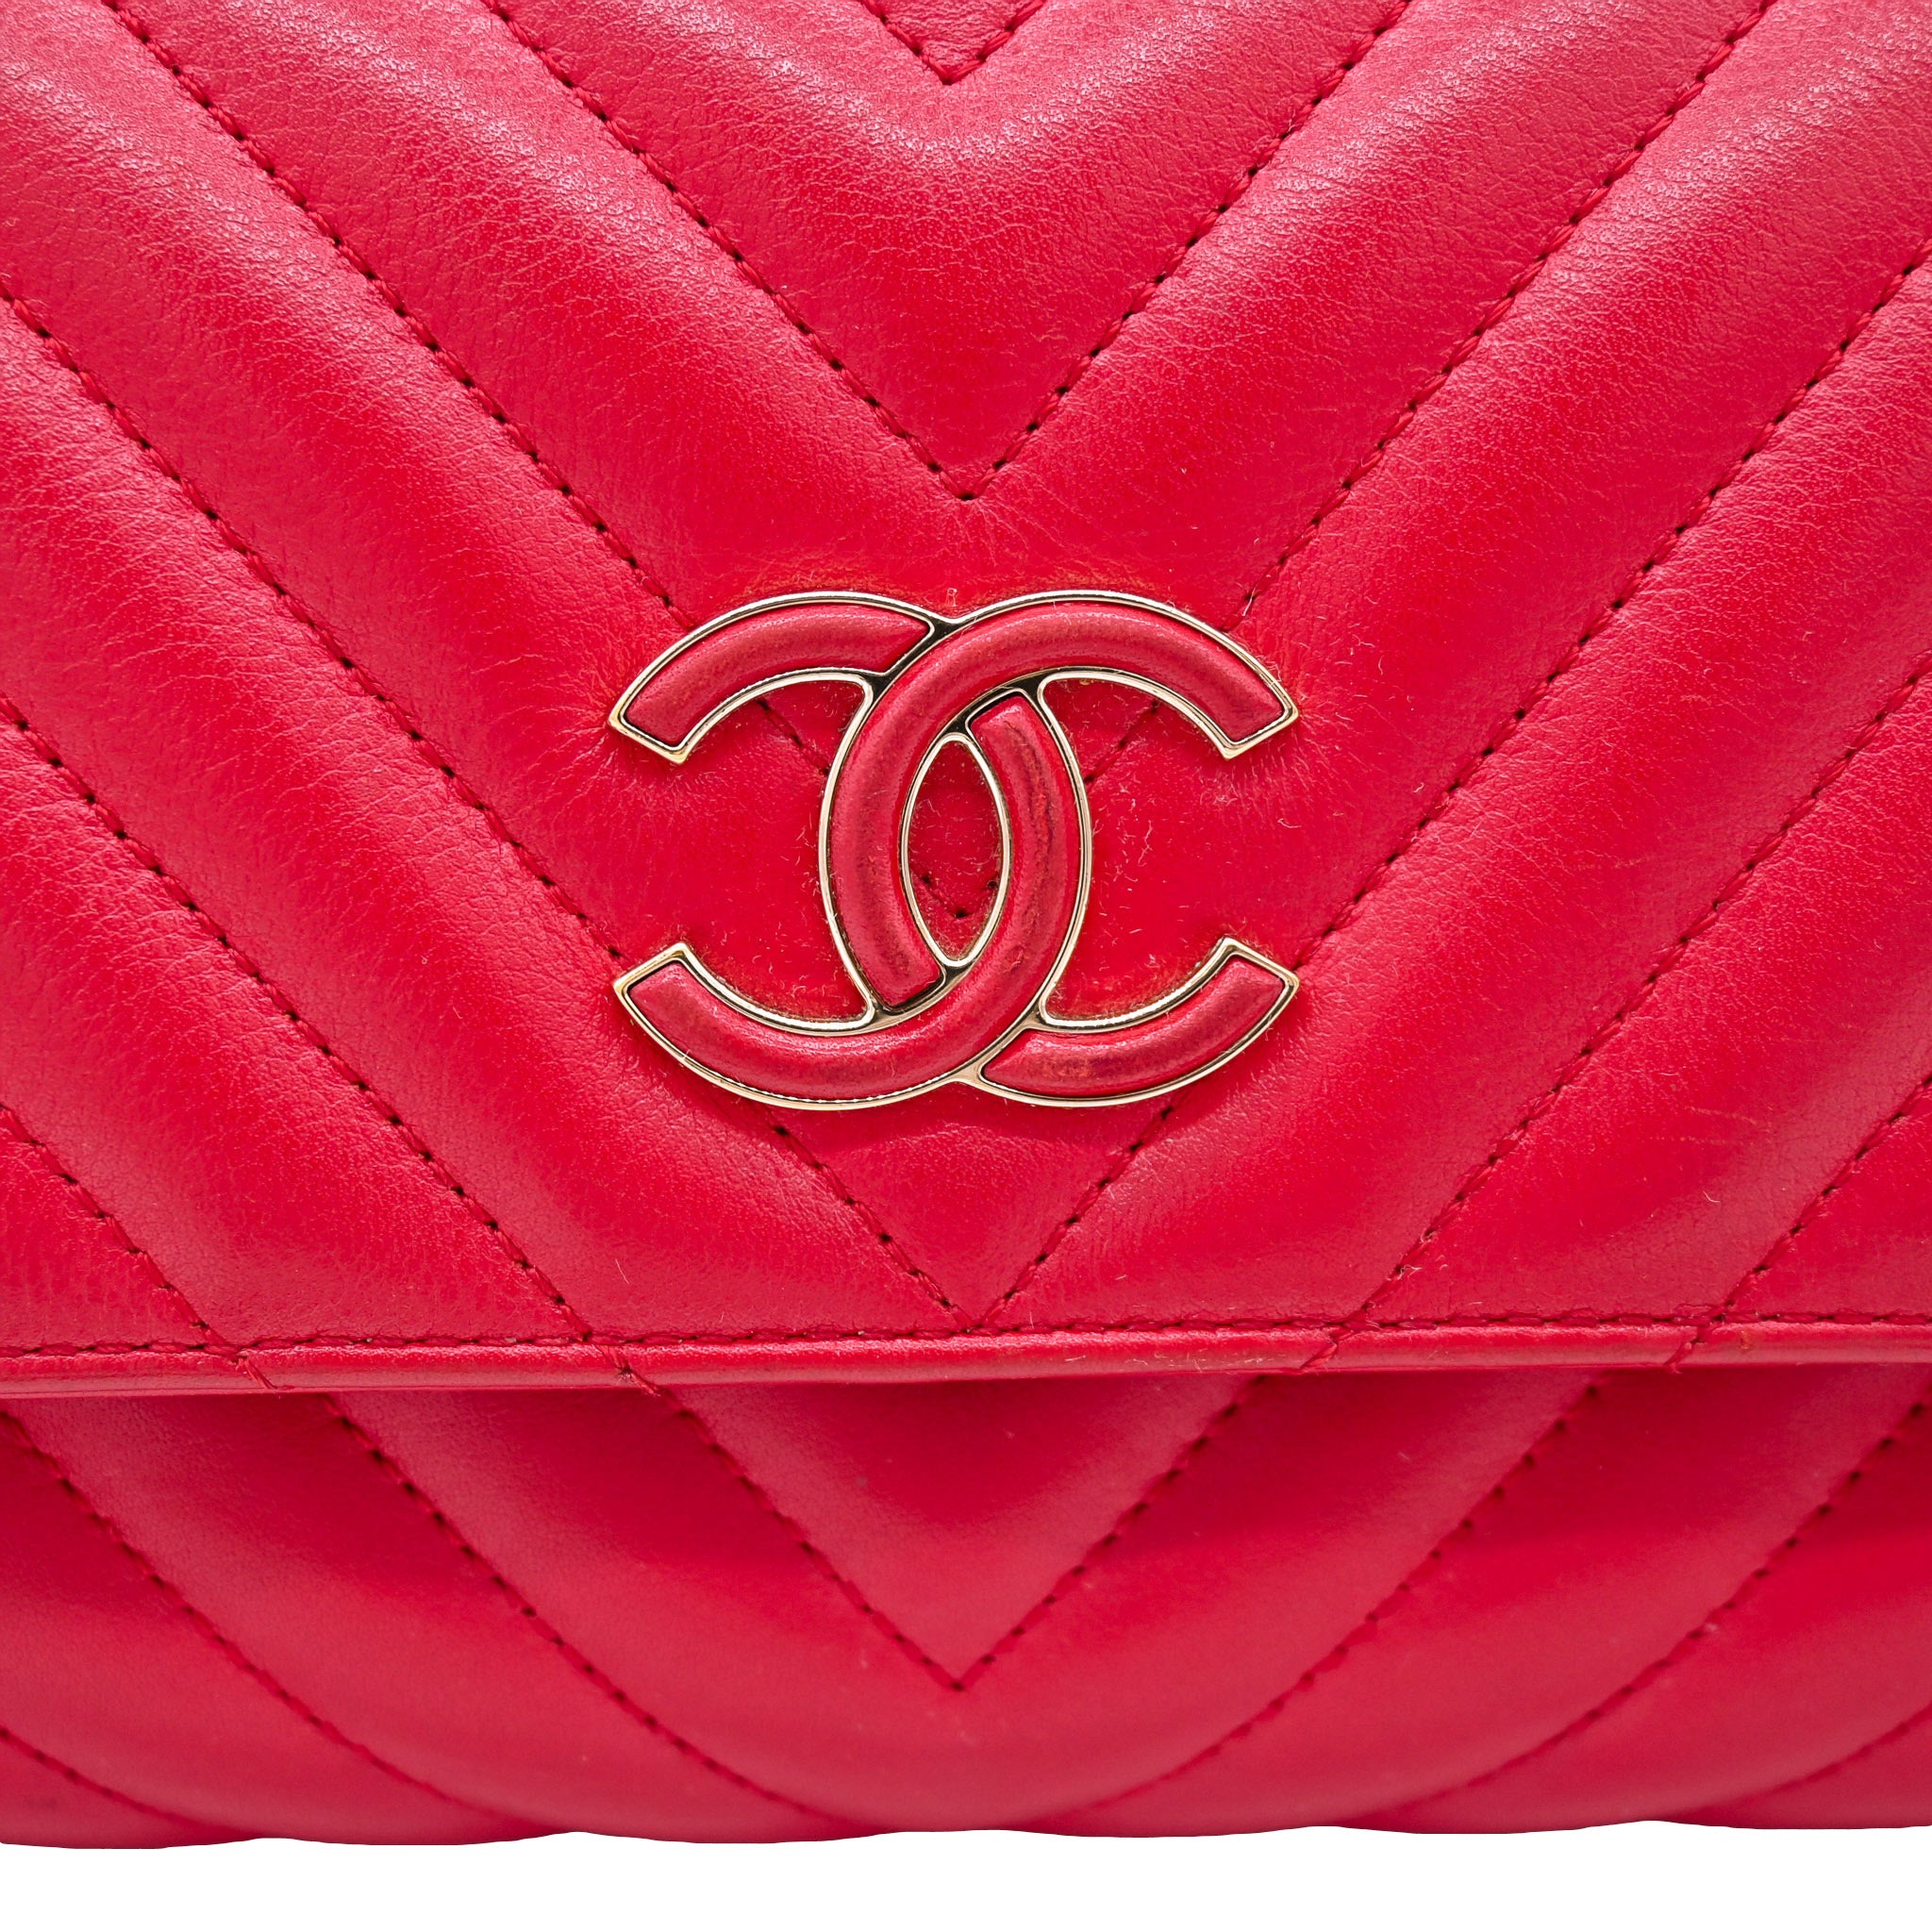 CHANEL Chanel Chevron Daily Small Flap Bag Red - Vault 55